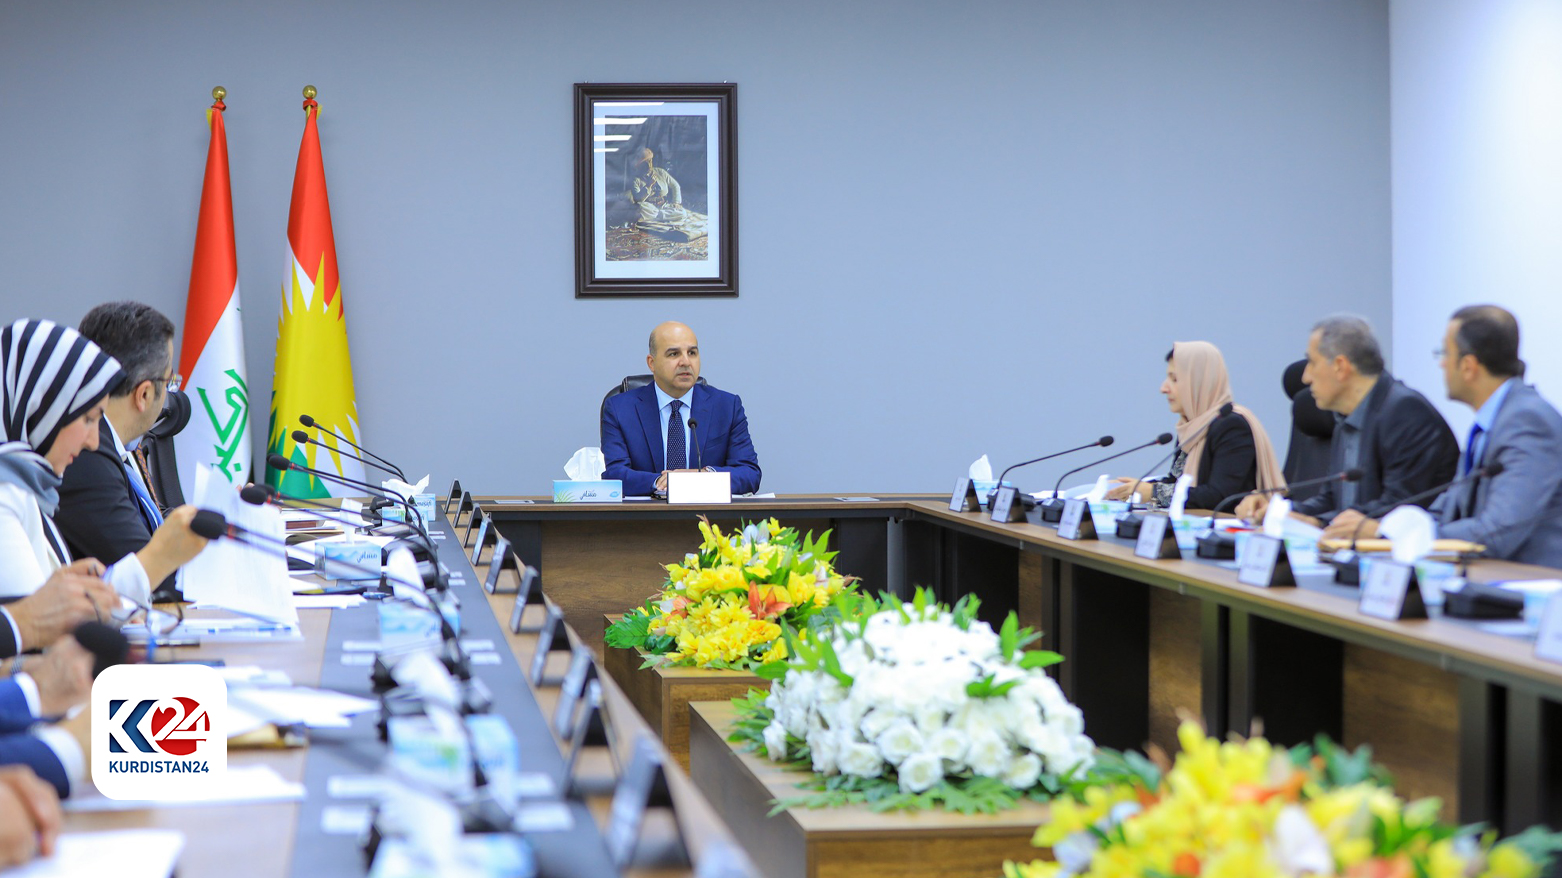 The photo shows the meeting at the Ministry of Municipalities and Tourism. (Photo: Kurdistan 24)